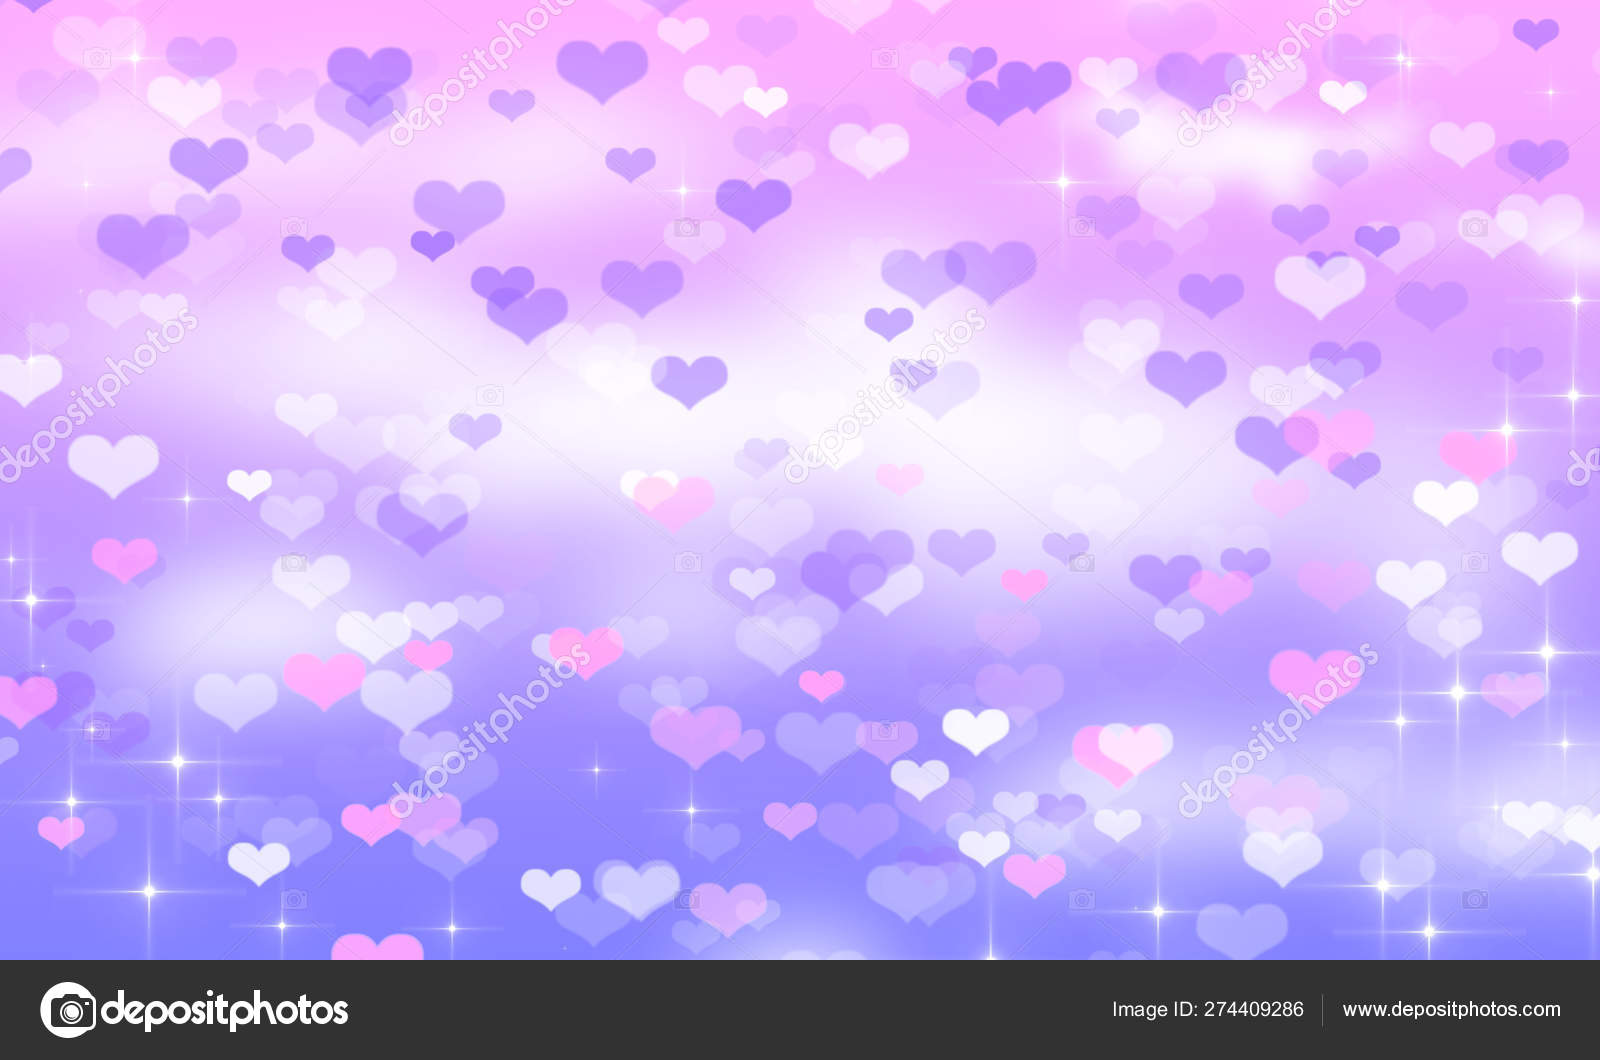 Blue And Pink Hearts Wallpaper